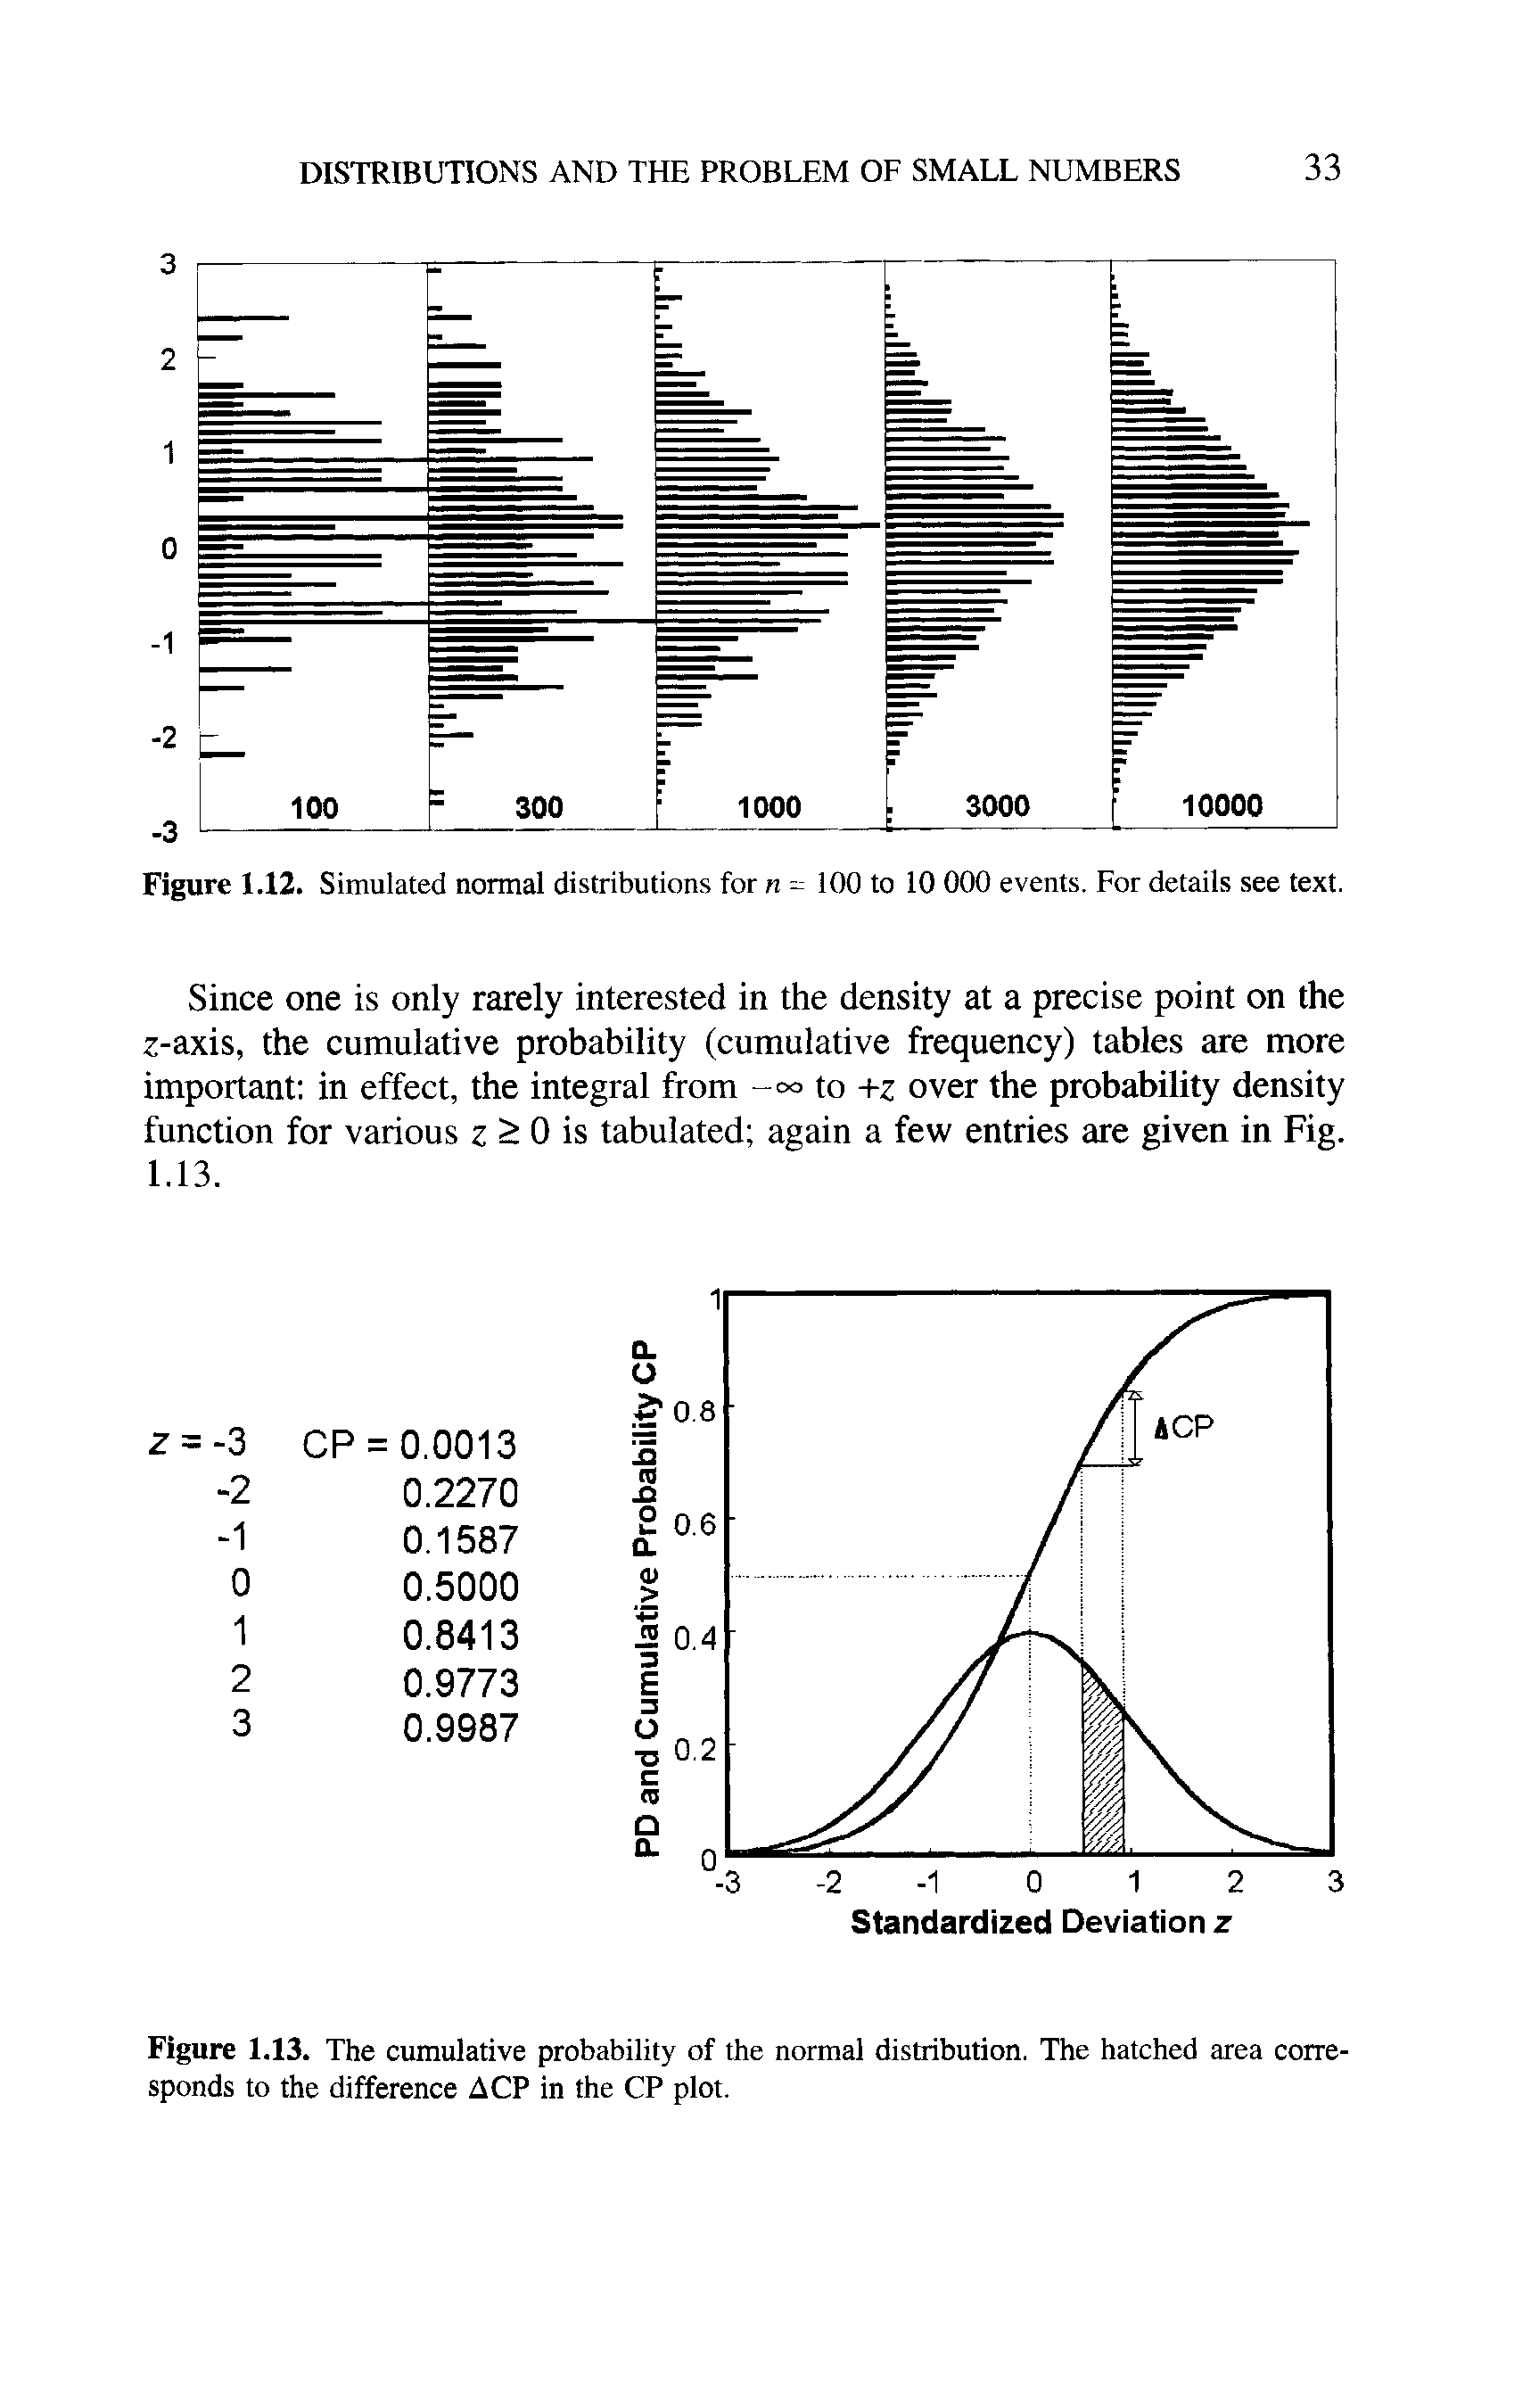 Figure 1.13. The cumulative probability of the normal distribution. The hatched area corresponds to the difference ACP in the CP plot.